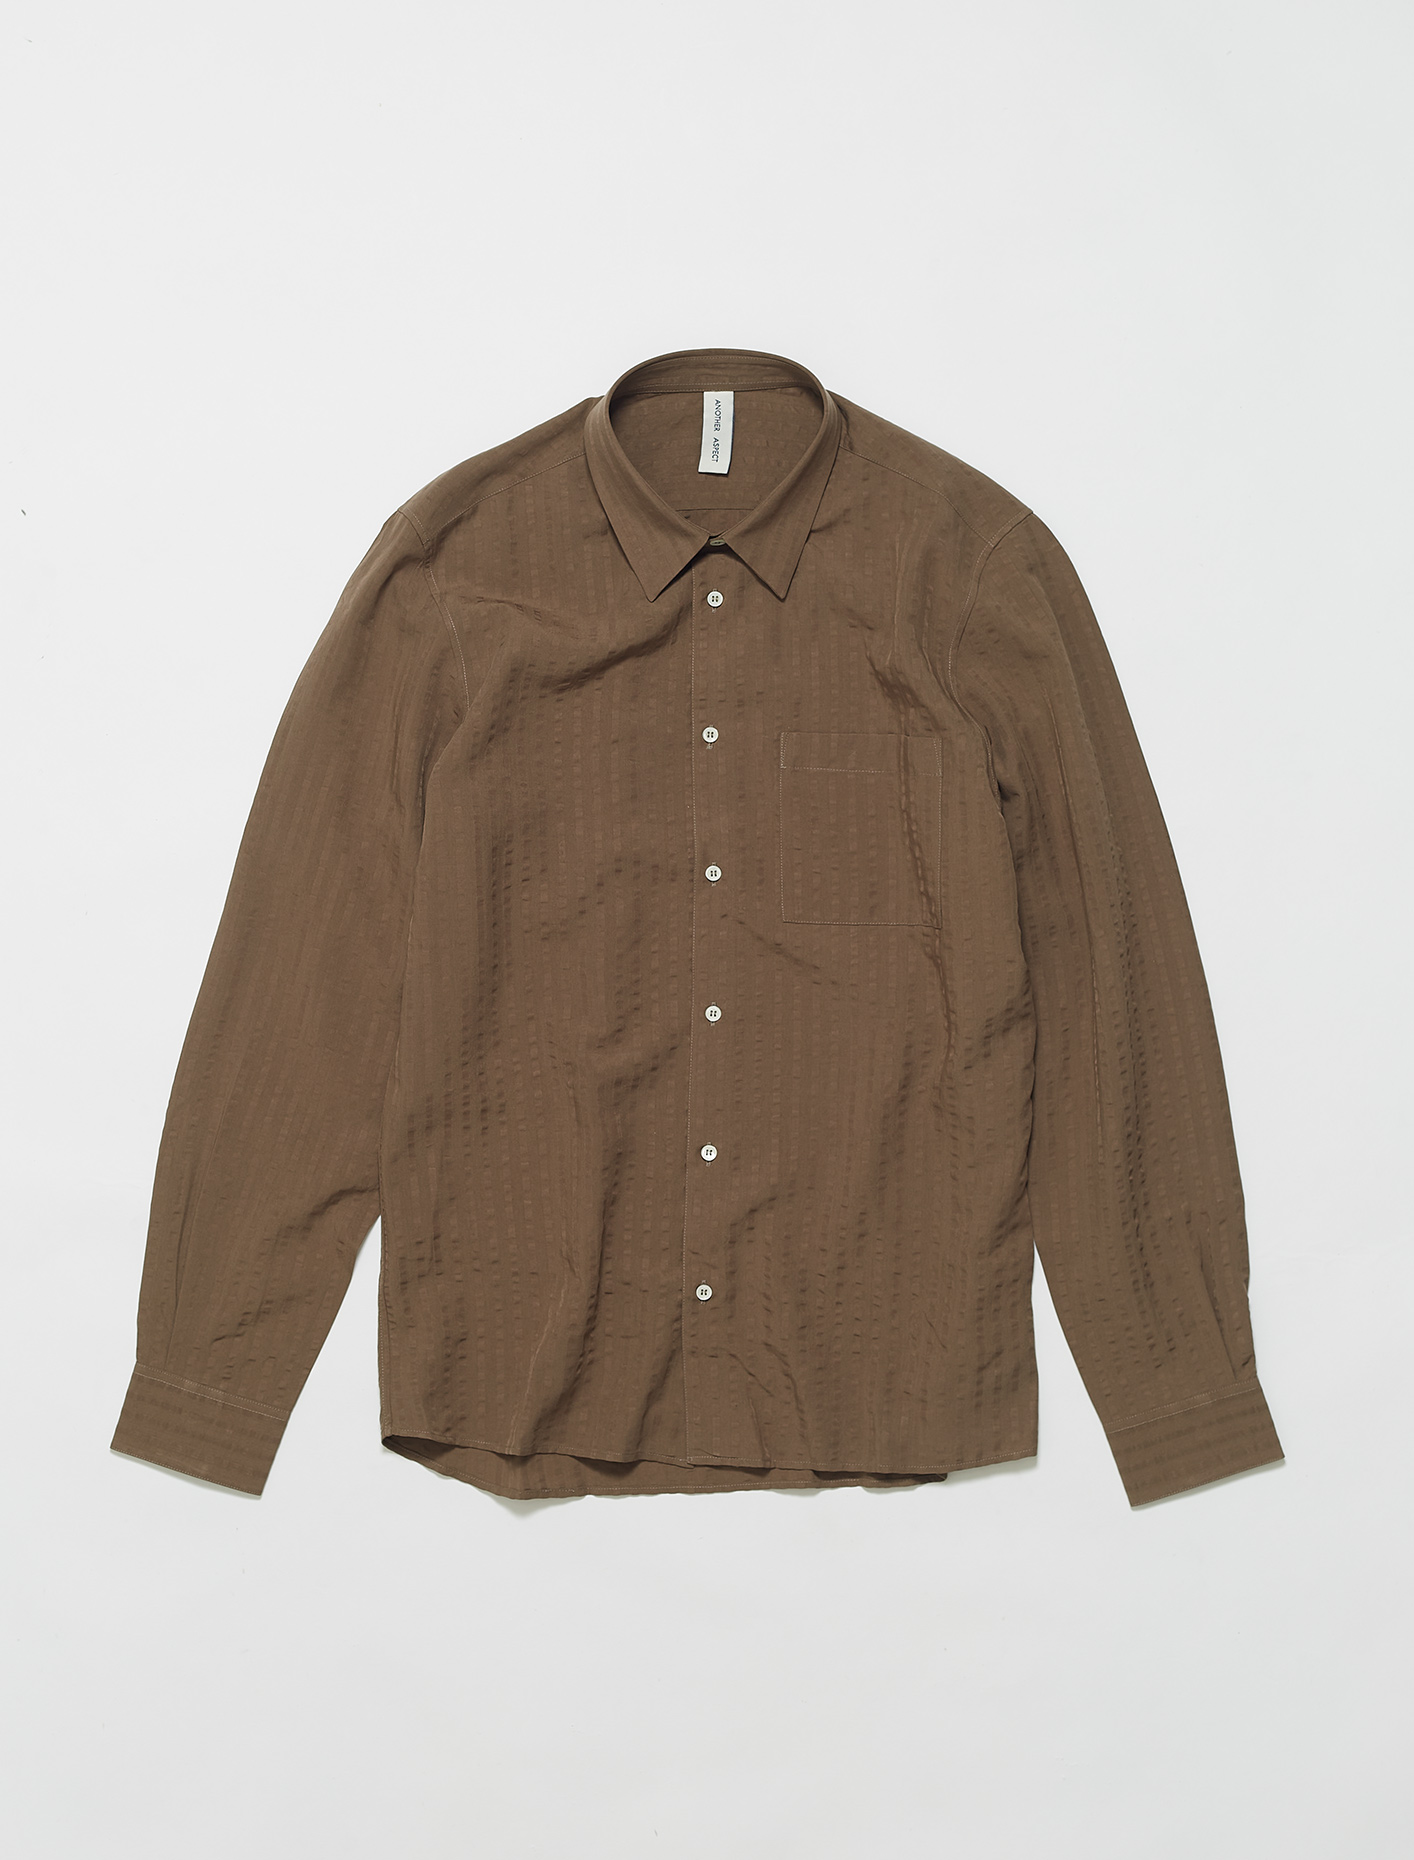 ANOTHER ASPECT ANOTHER Shirt 3.0 in Caramel | Voo Store Berlin